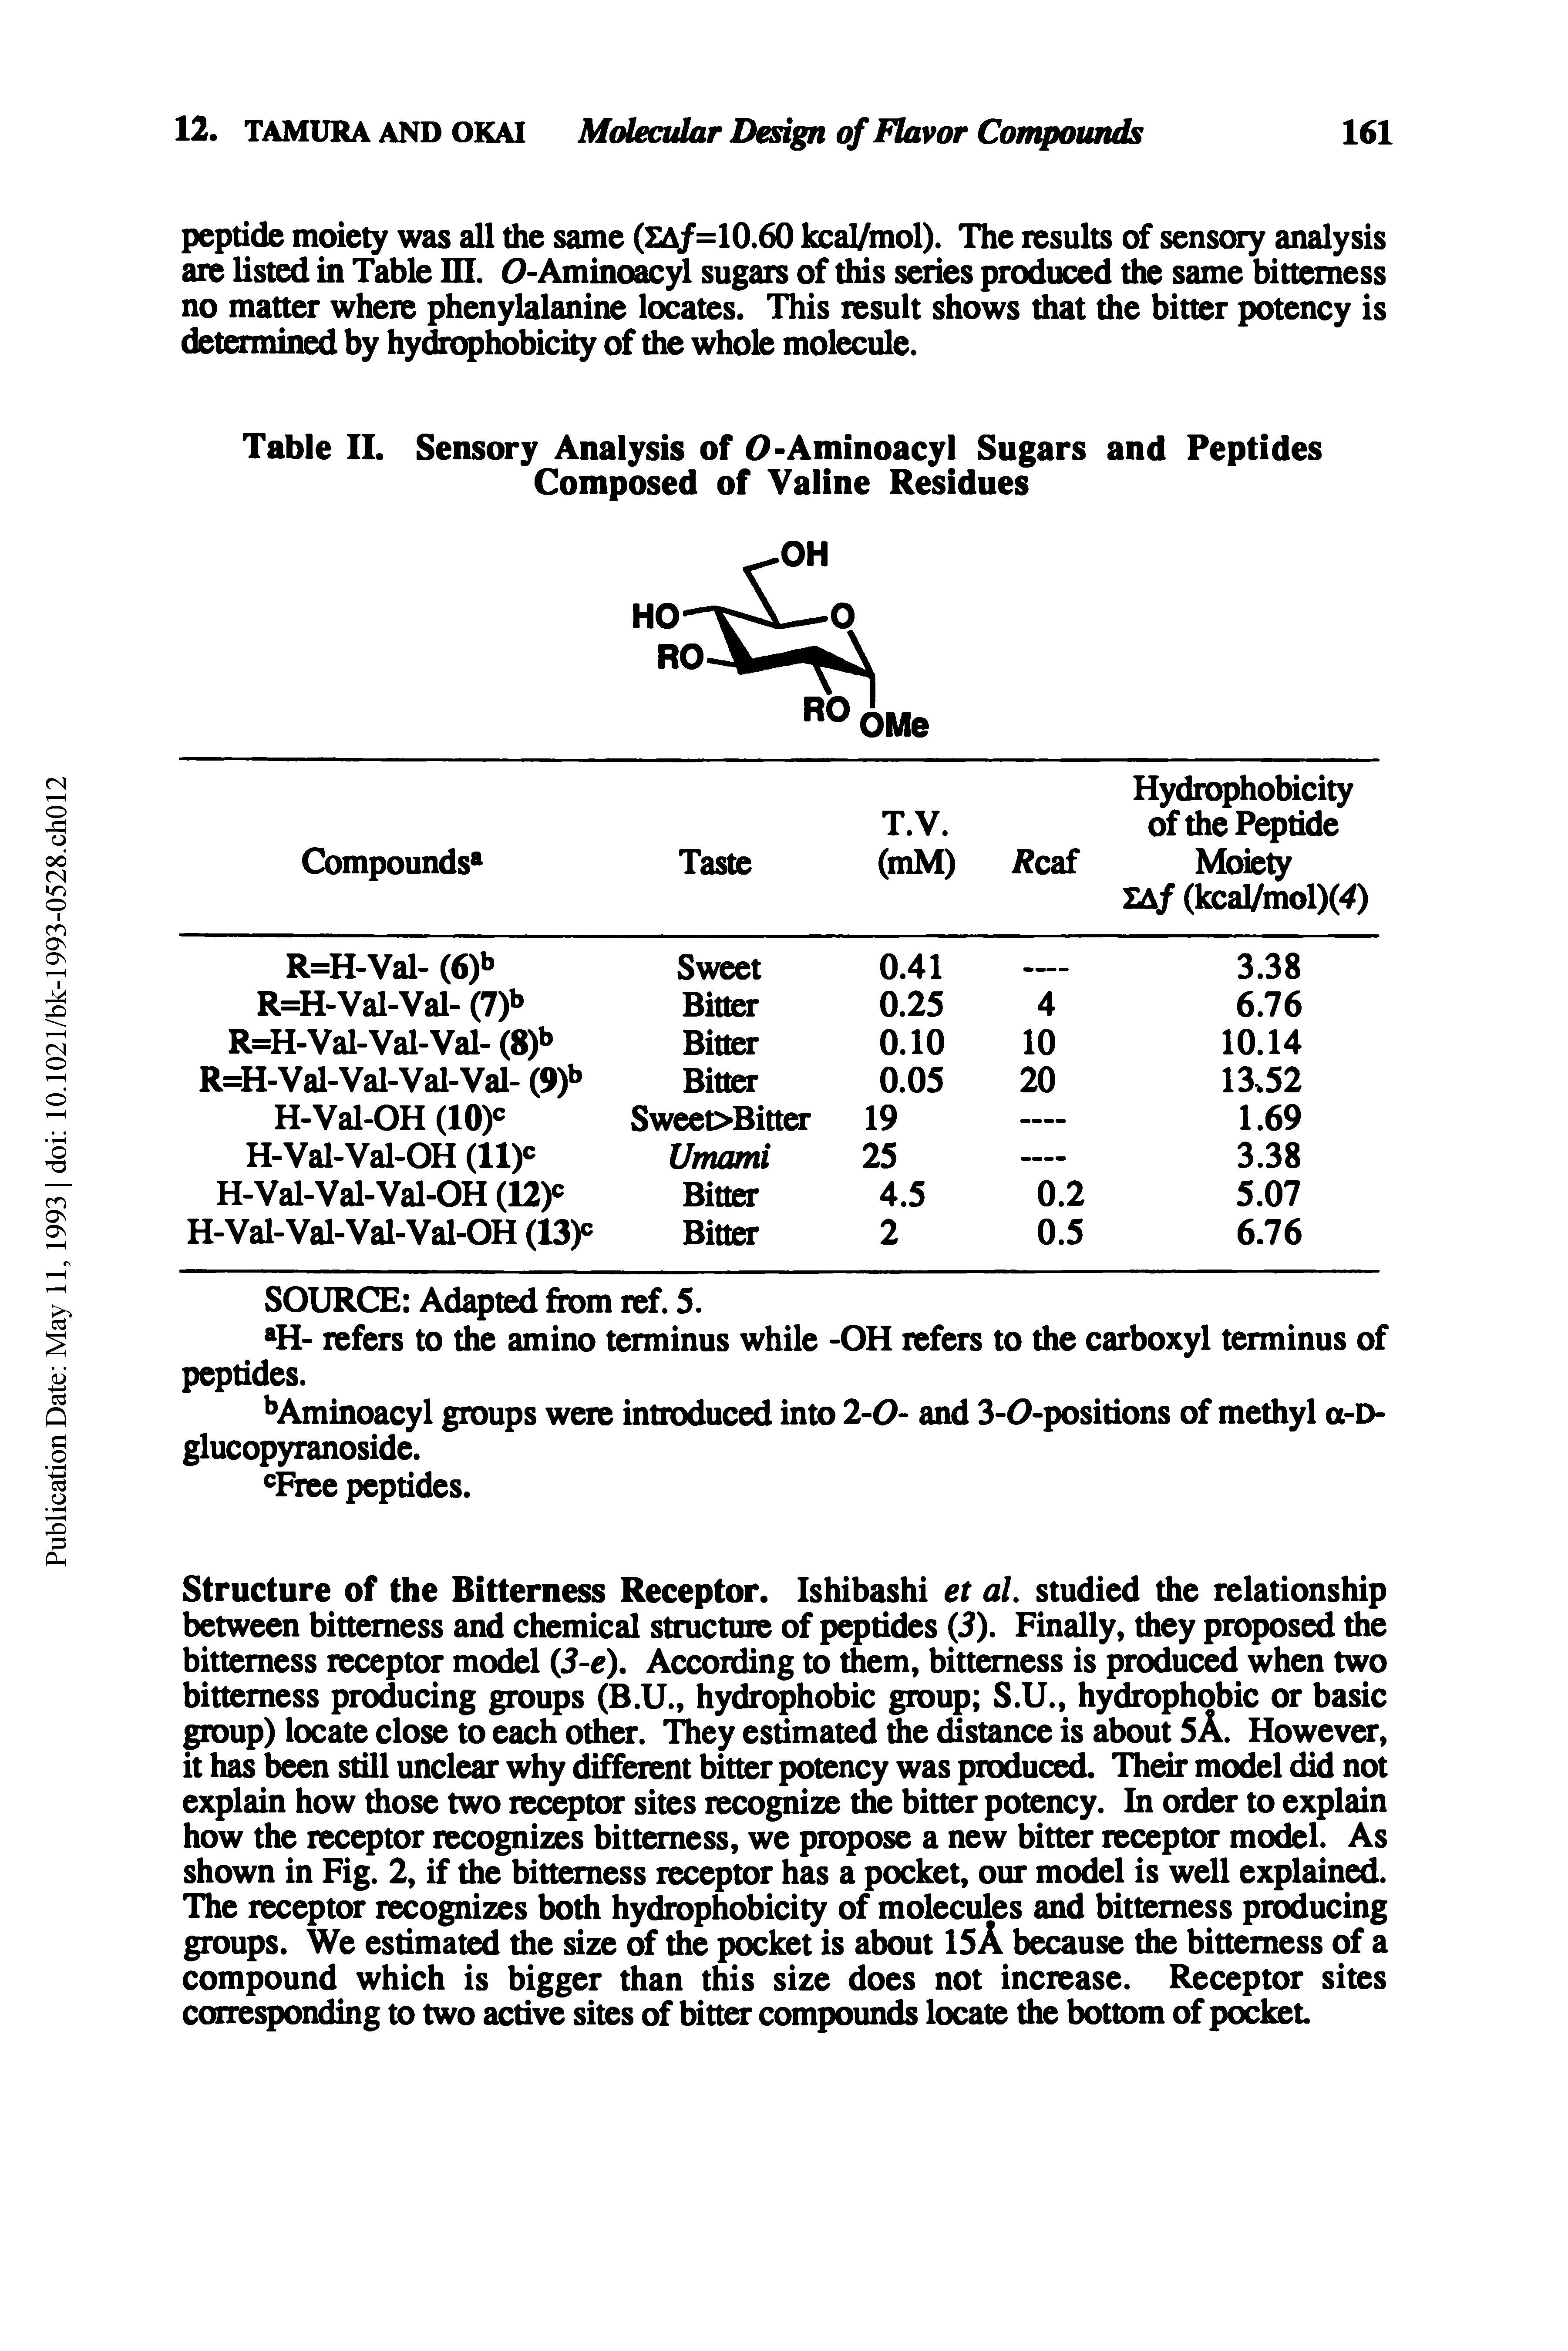 Table II. Sensory Analysis of 0-Aminoacyl Sugars and Peptides Composed of Valine Residues...